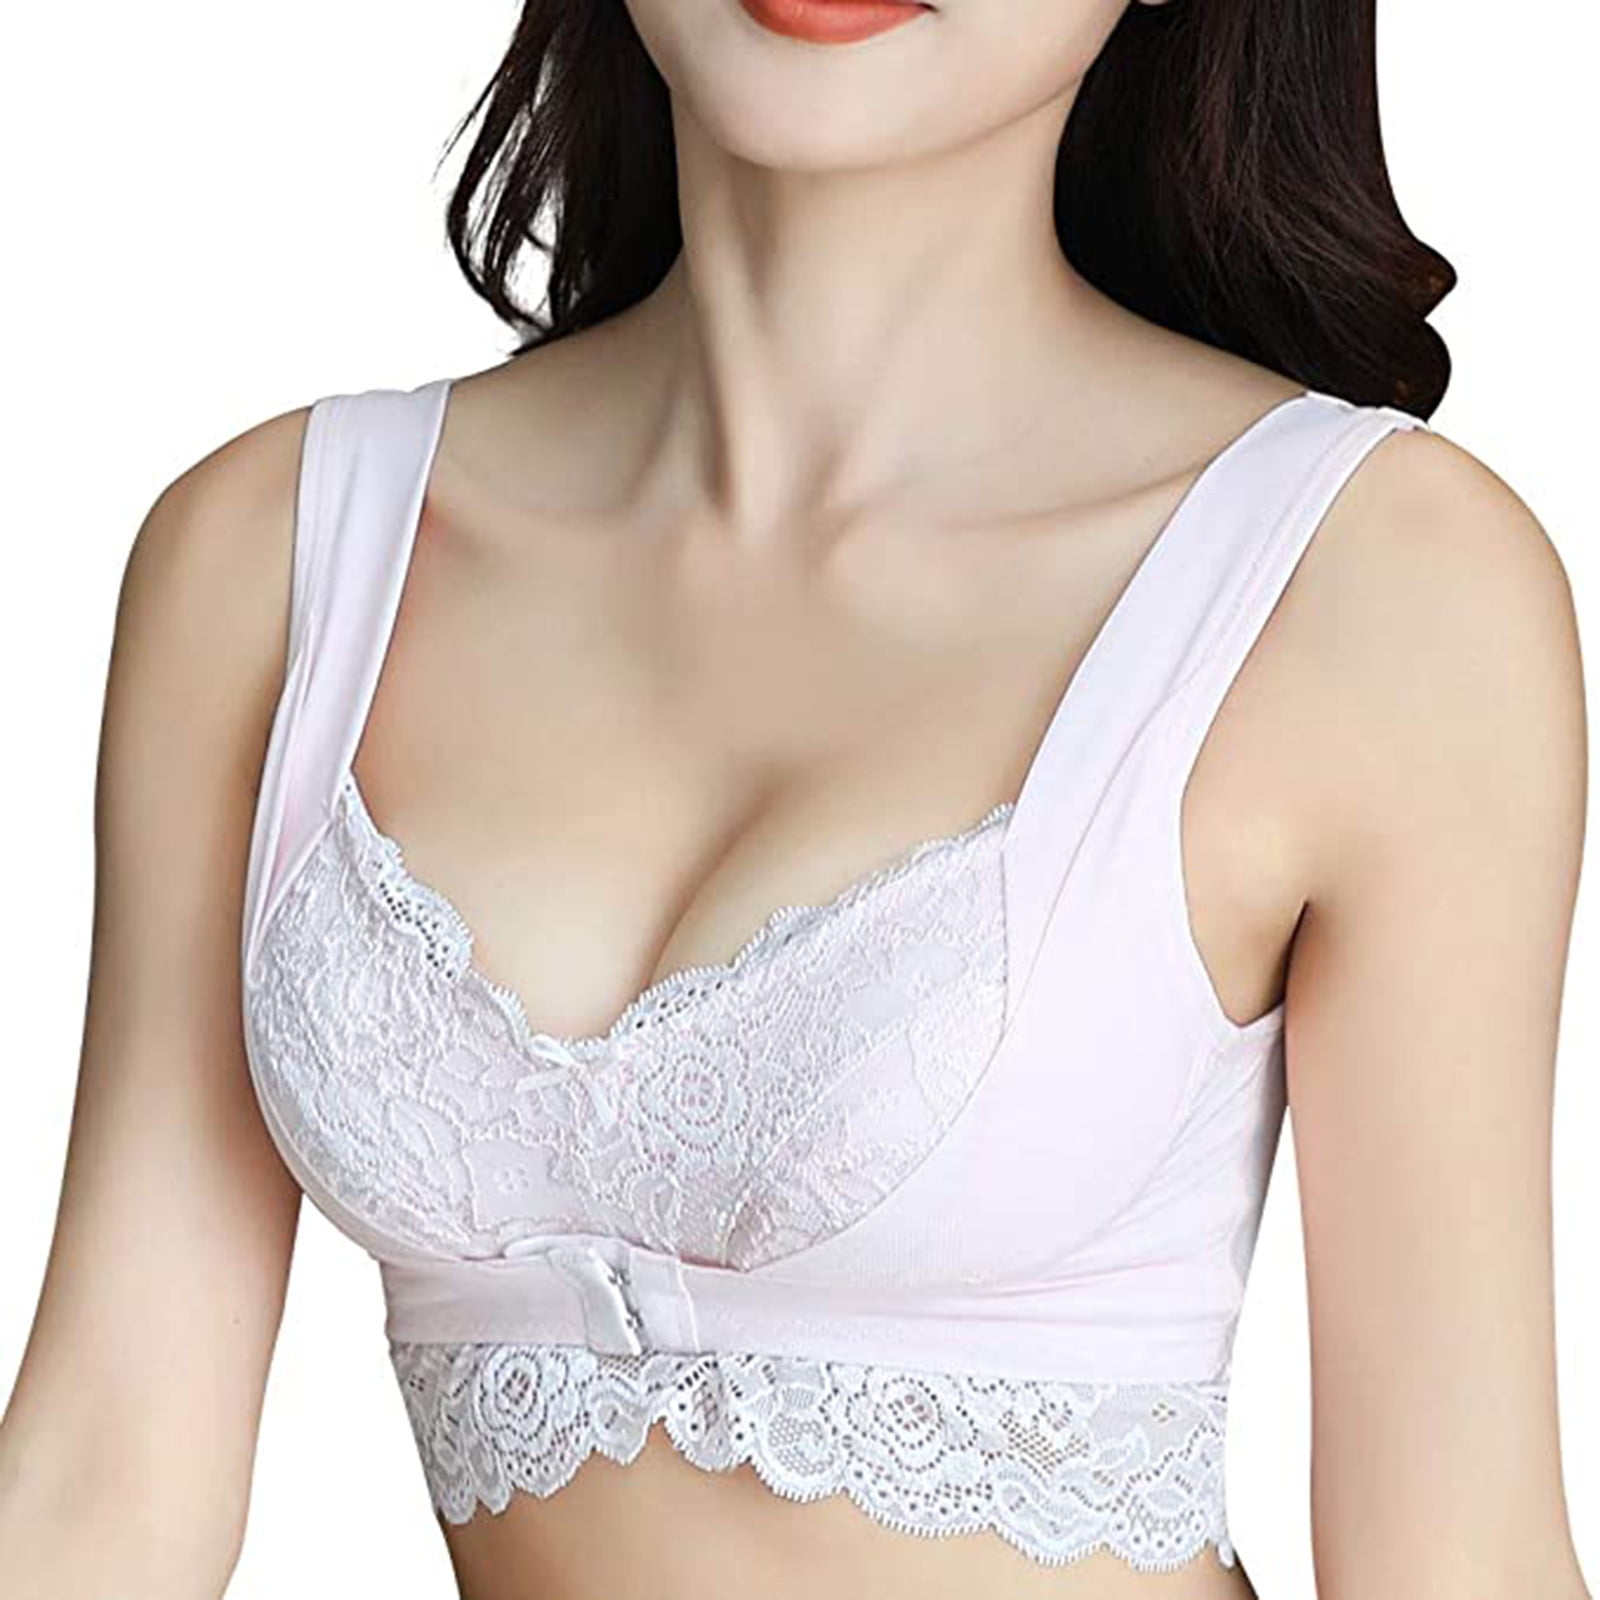  ANMUR Sexy Lace Bra for Women with Support Ladies Full